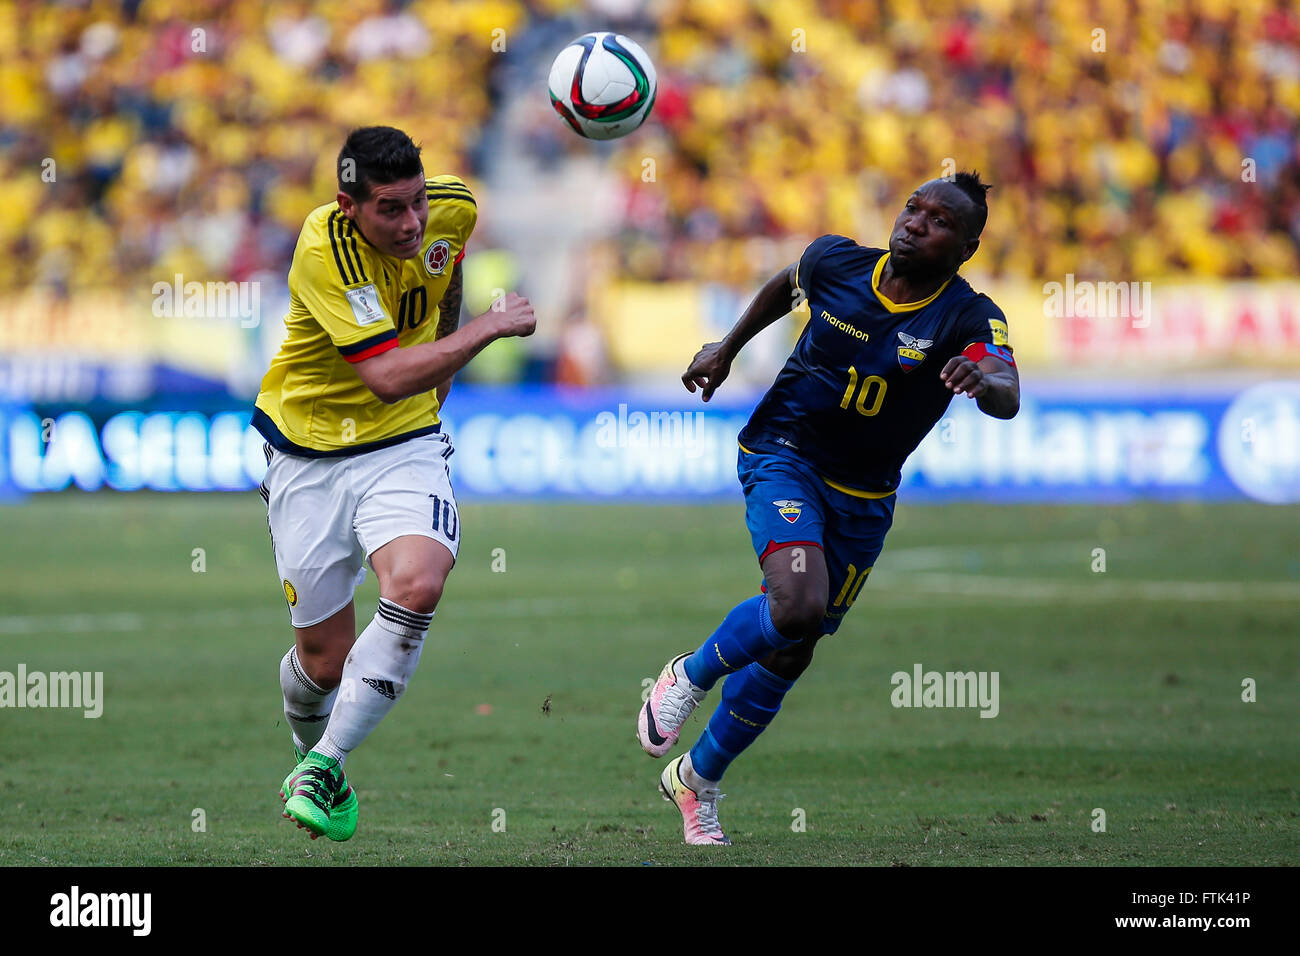 Barranquilla, Colombia. 29th Mar, 2016. Colombia's James Rodriguez (L) vies with Ecuador's Walter Ayovi during their qualifying match for 2018 Russia World Cup at Metropolitano Roberto Melendez Stadium in Barranquilla, Colombia, on March 29, 2016. Colombia won 3-1. © Mauricio Alvarado/COLPRENSA/Xinhua/Alamy Live News Stock Photo